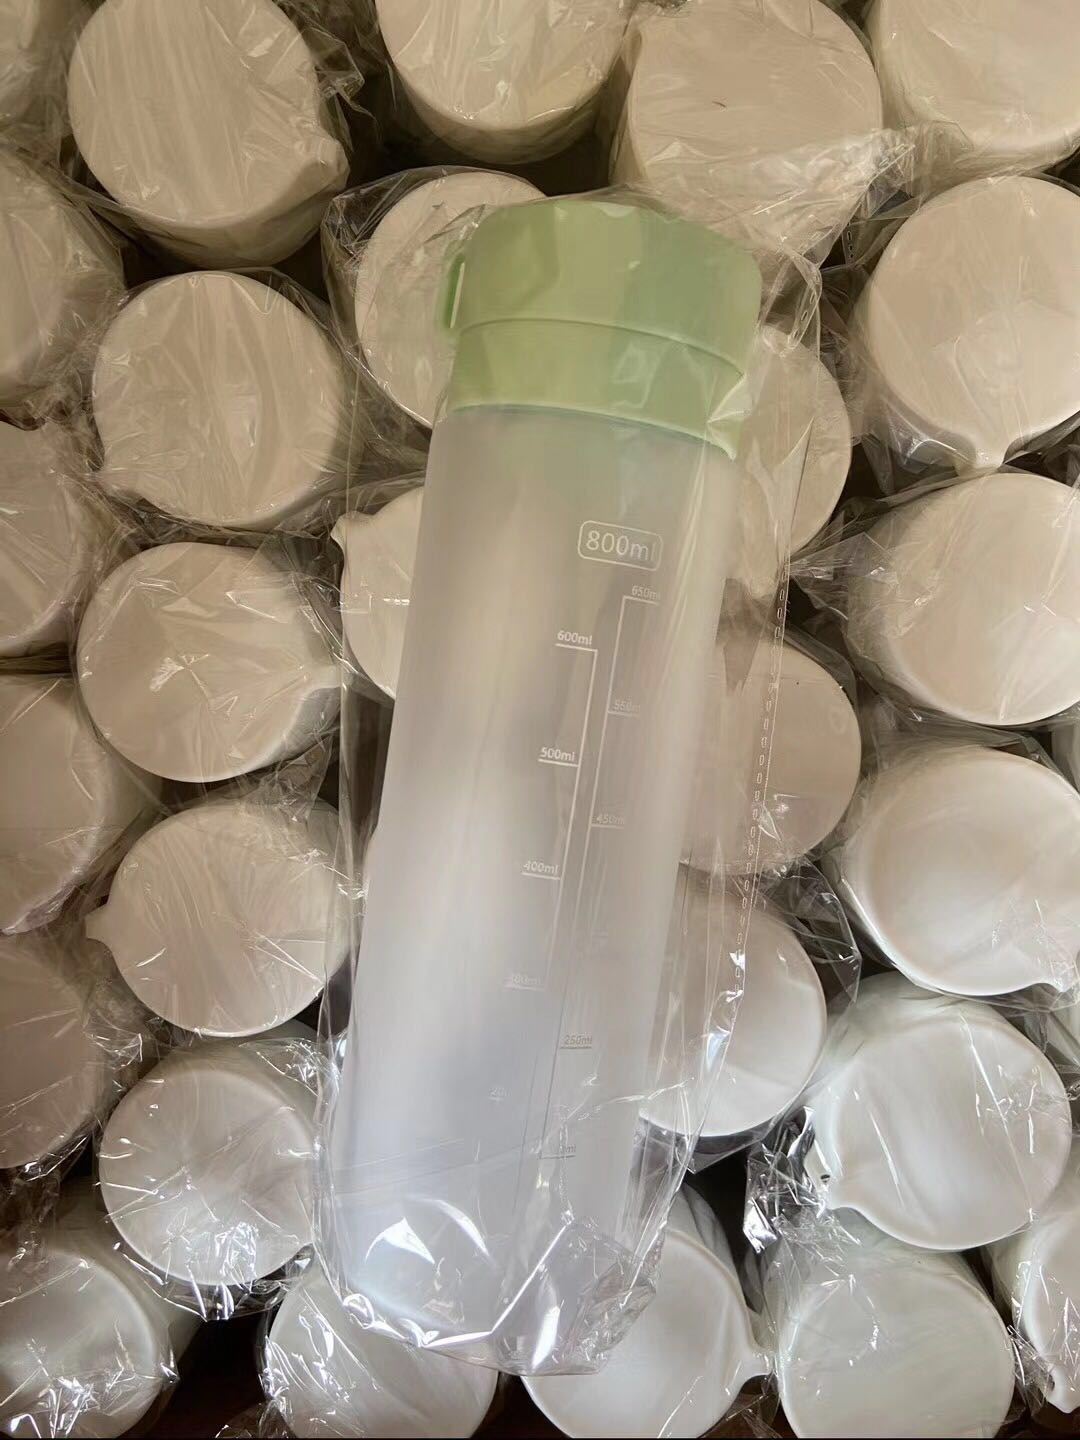 The Republic Of Nicaragua Customer 2000pcs Plastic Water Bottle Is Going To Packing